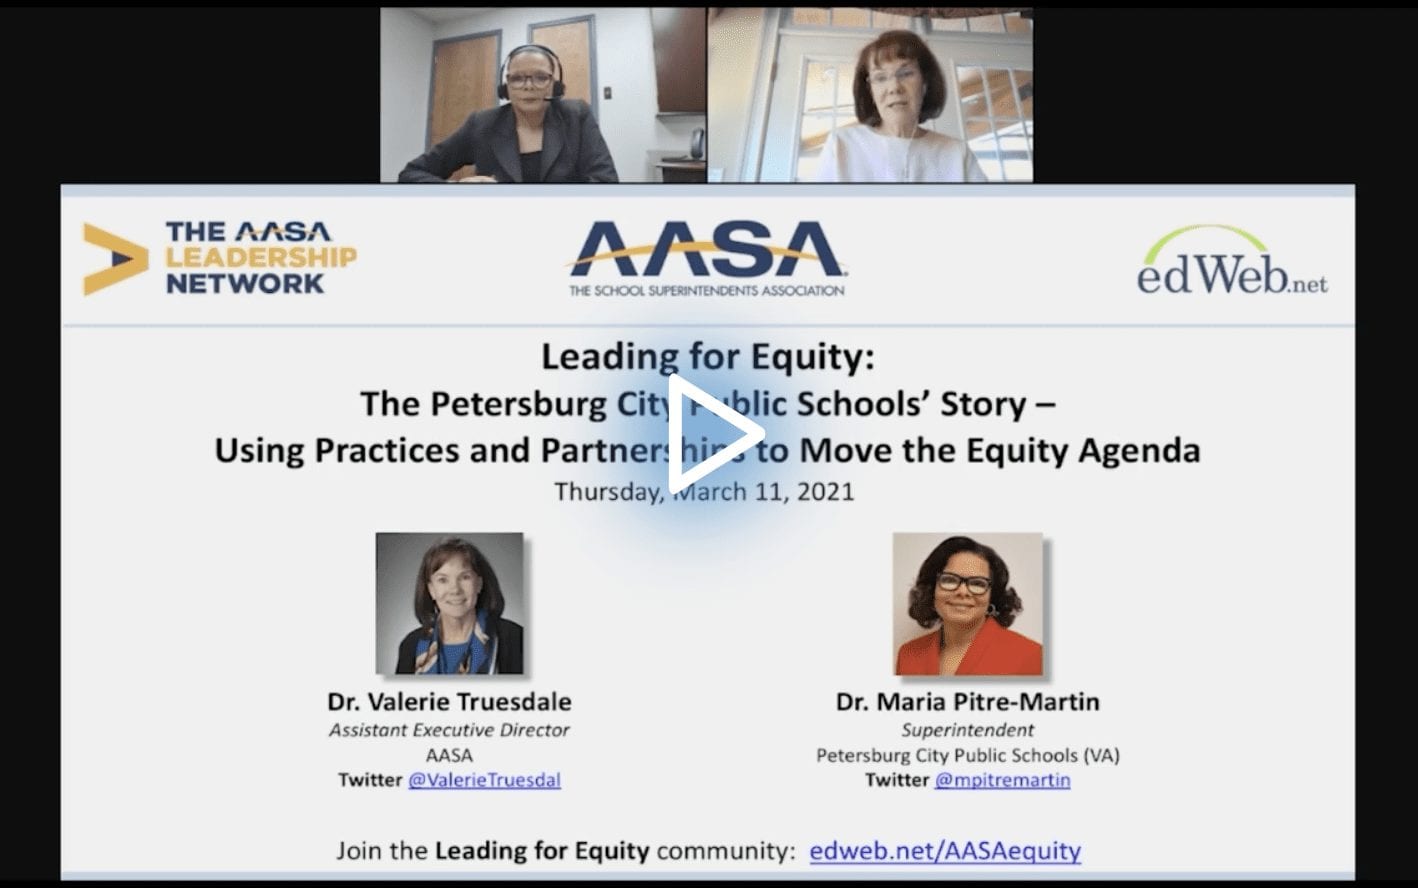 Leading for Equity: The Petersburg City Public Schools’ Story – Using Practices and Partnerships to Move the Equity Agenda edWebinar recording link